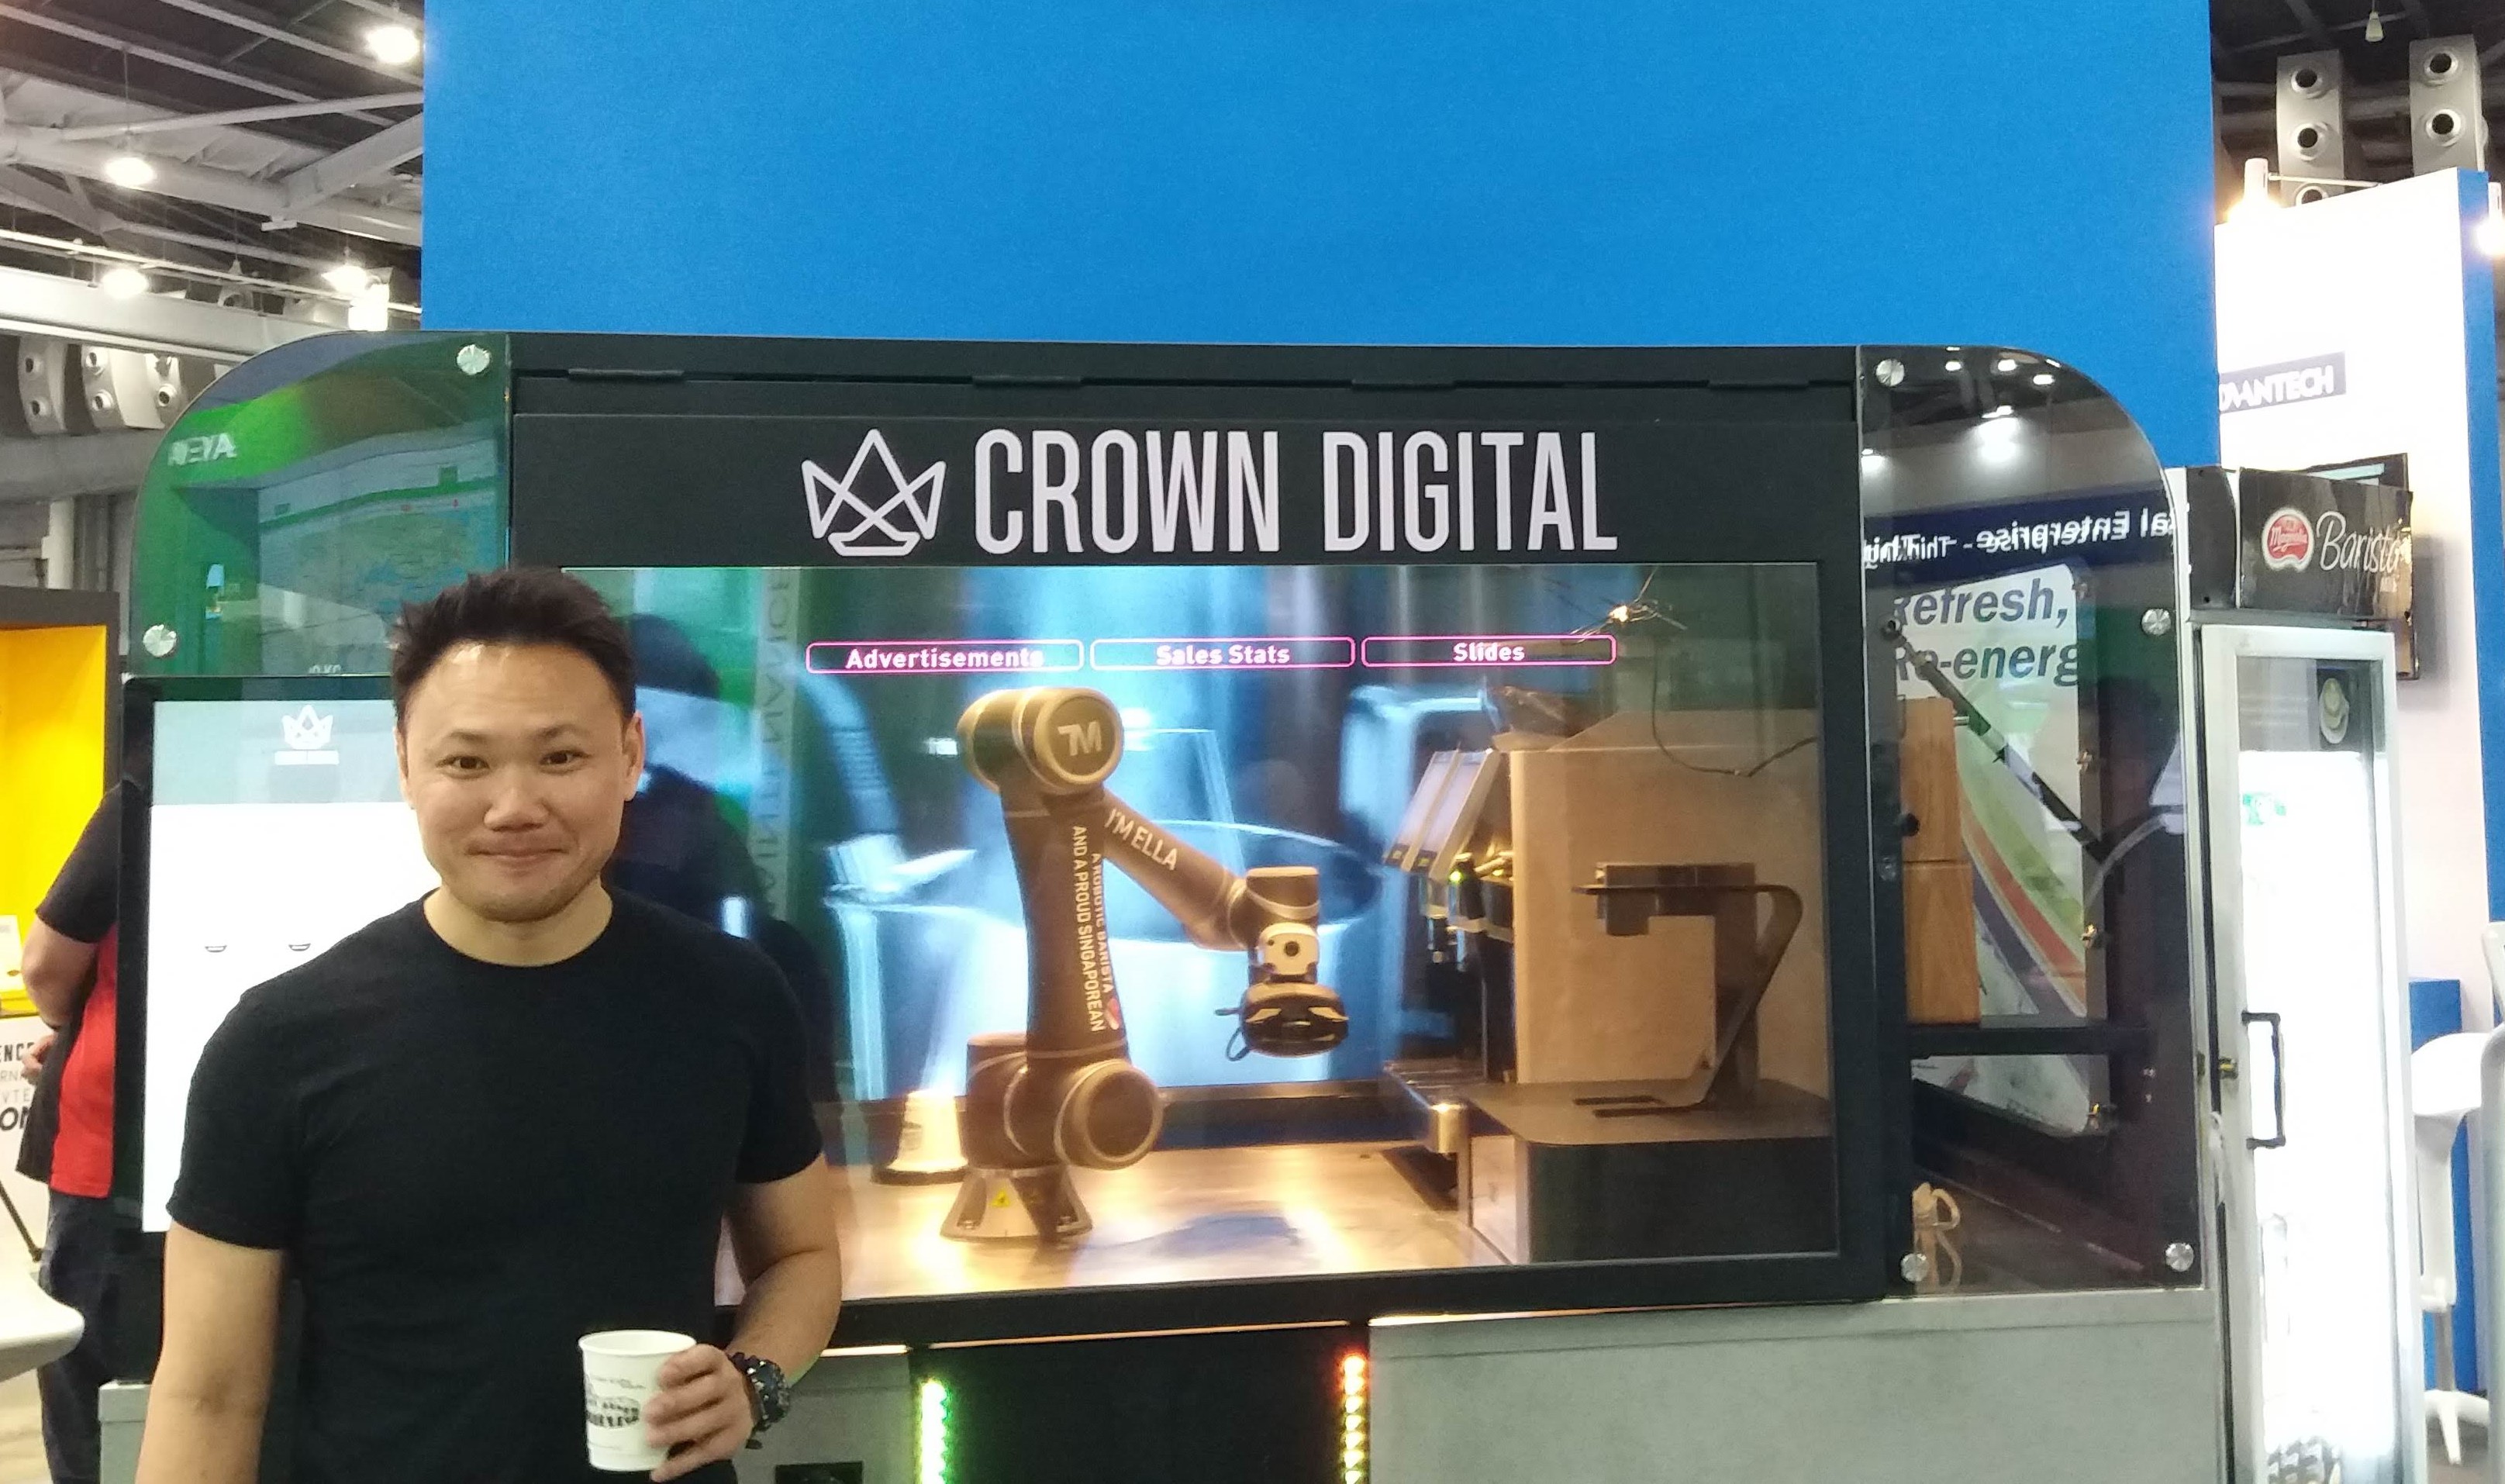 Industry 4.0 coffee: Introducing Ella the robotic barista from Singapore